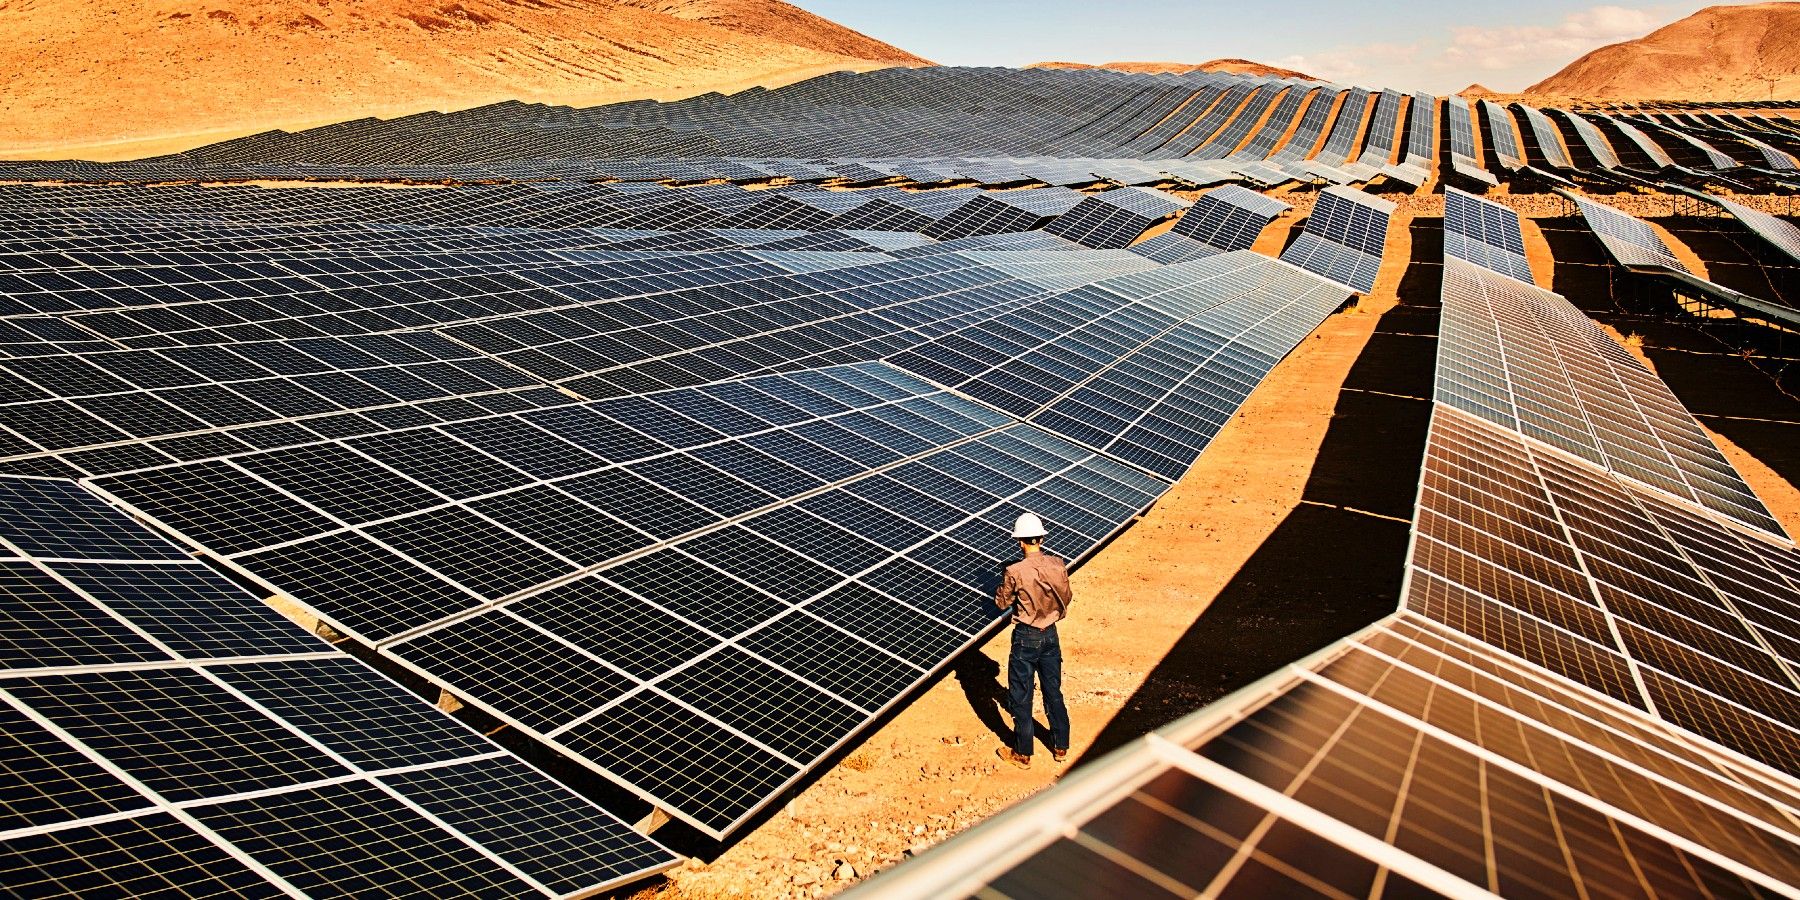 The newly completed Turquoise solar farm in Nevada delivers 50 megawatts of renewable power to Apple and is the company s fourth solar project in the state.